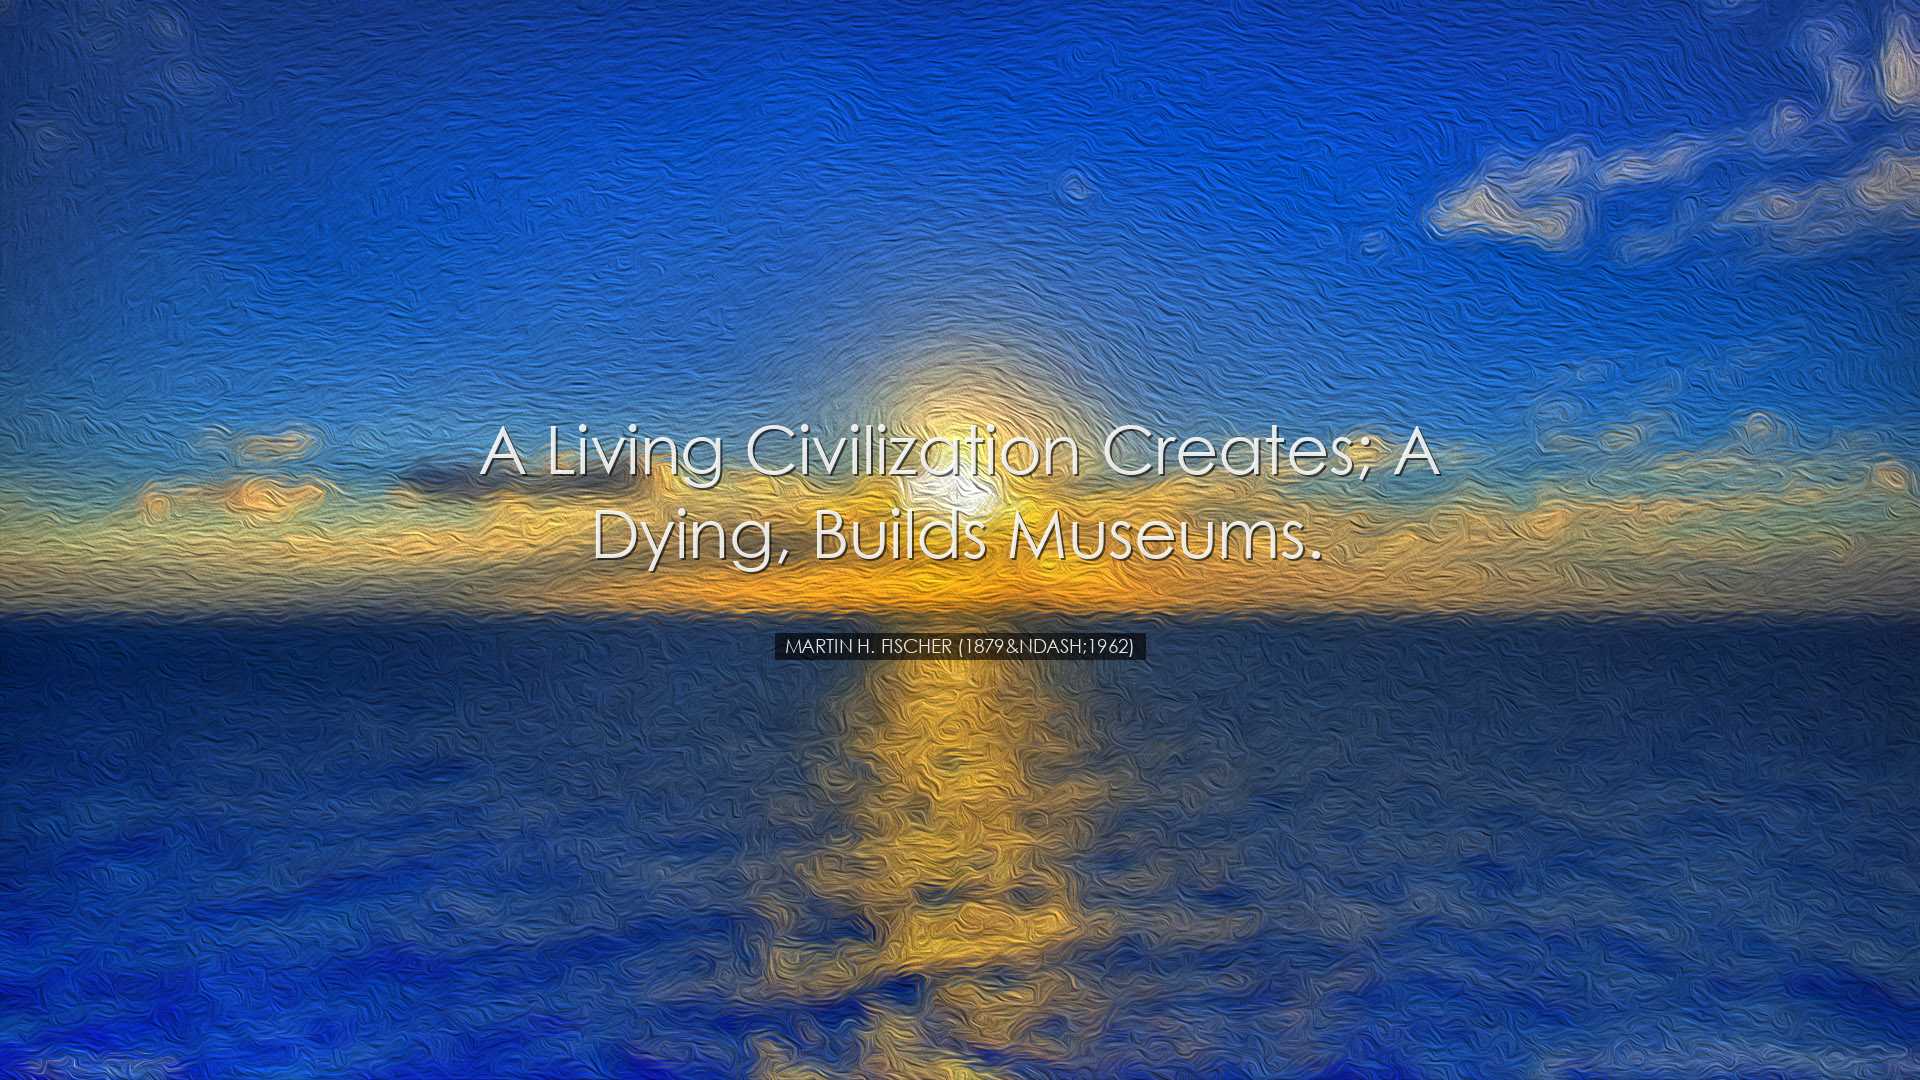 A living civilization creates; a dying, builds museums. - Martin H